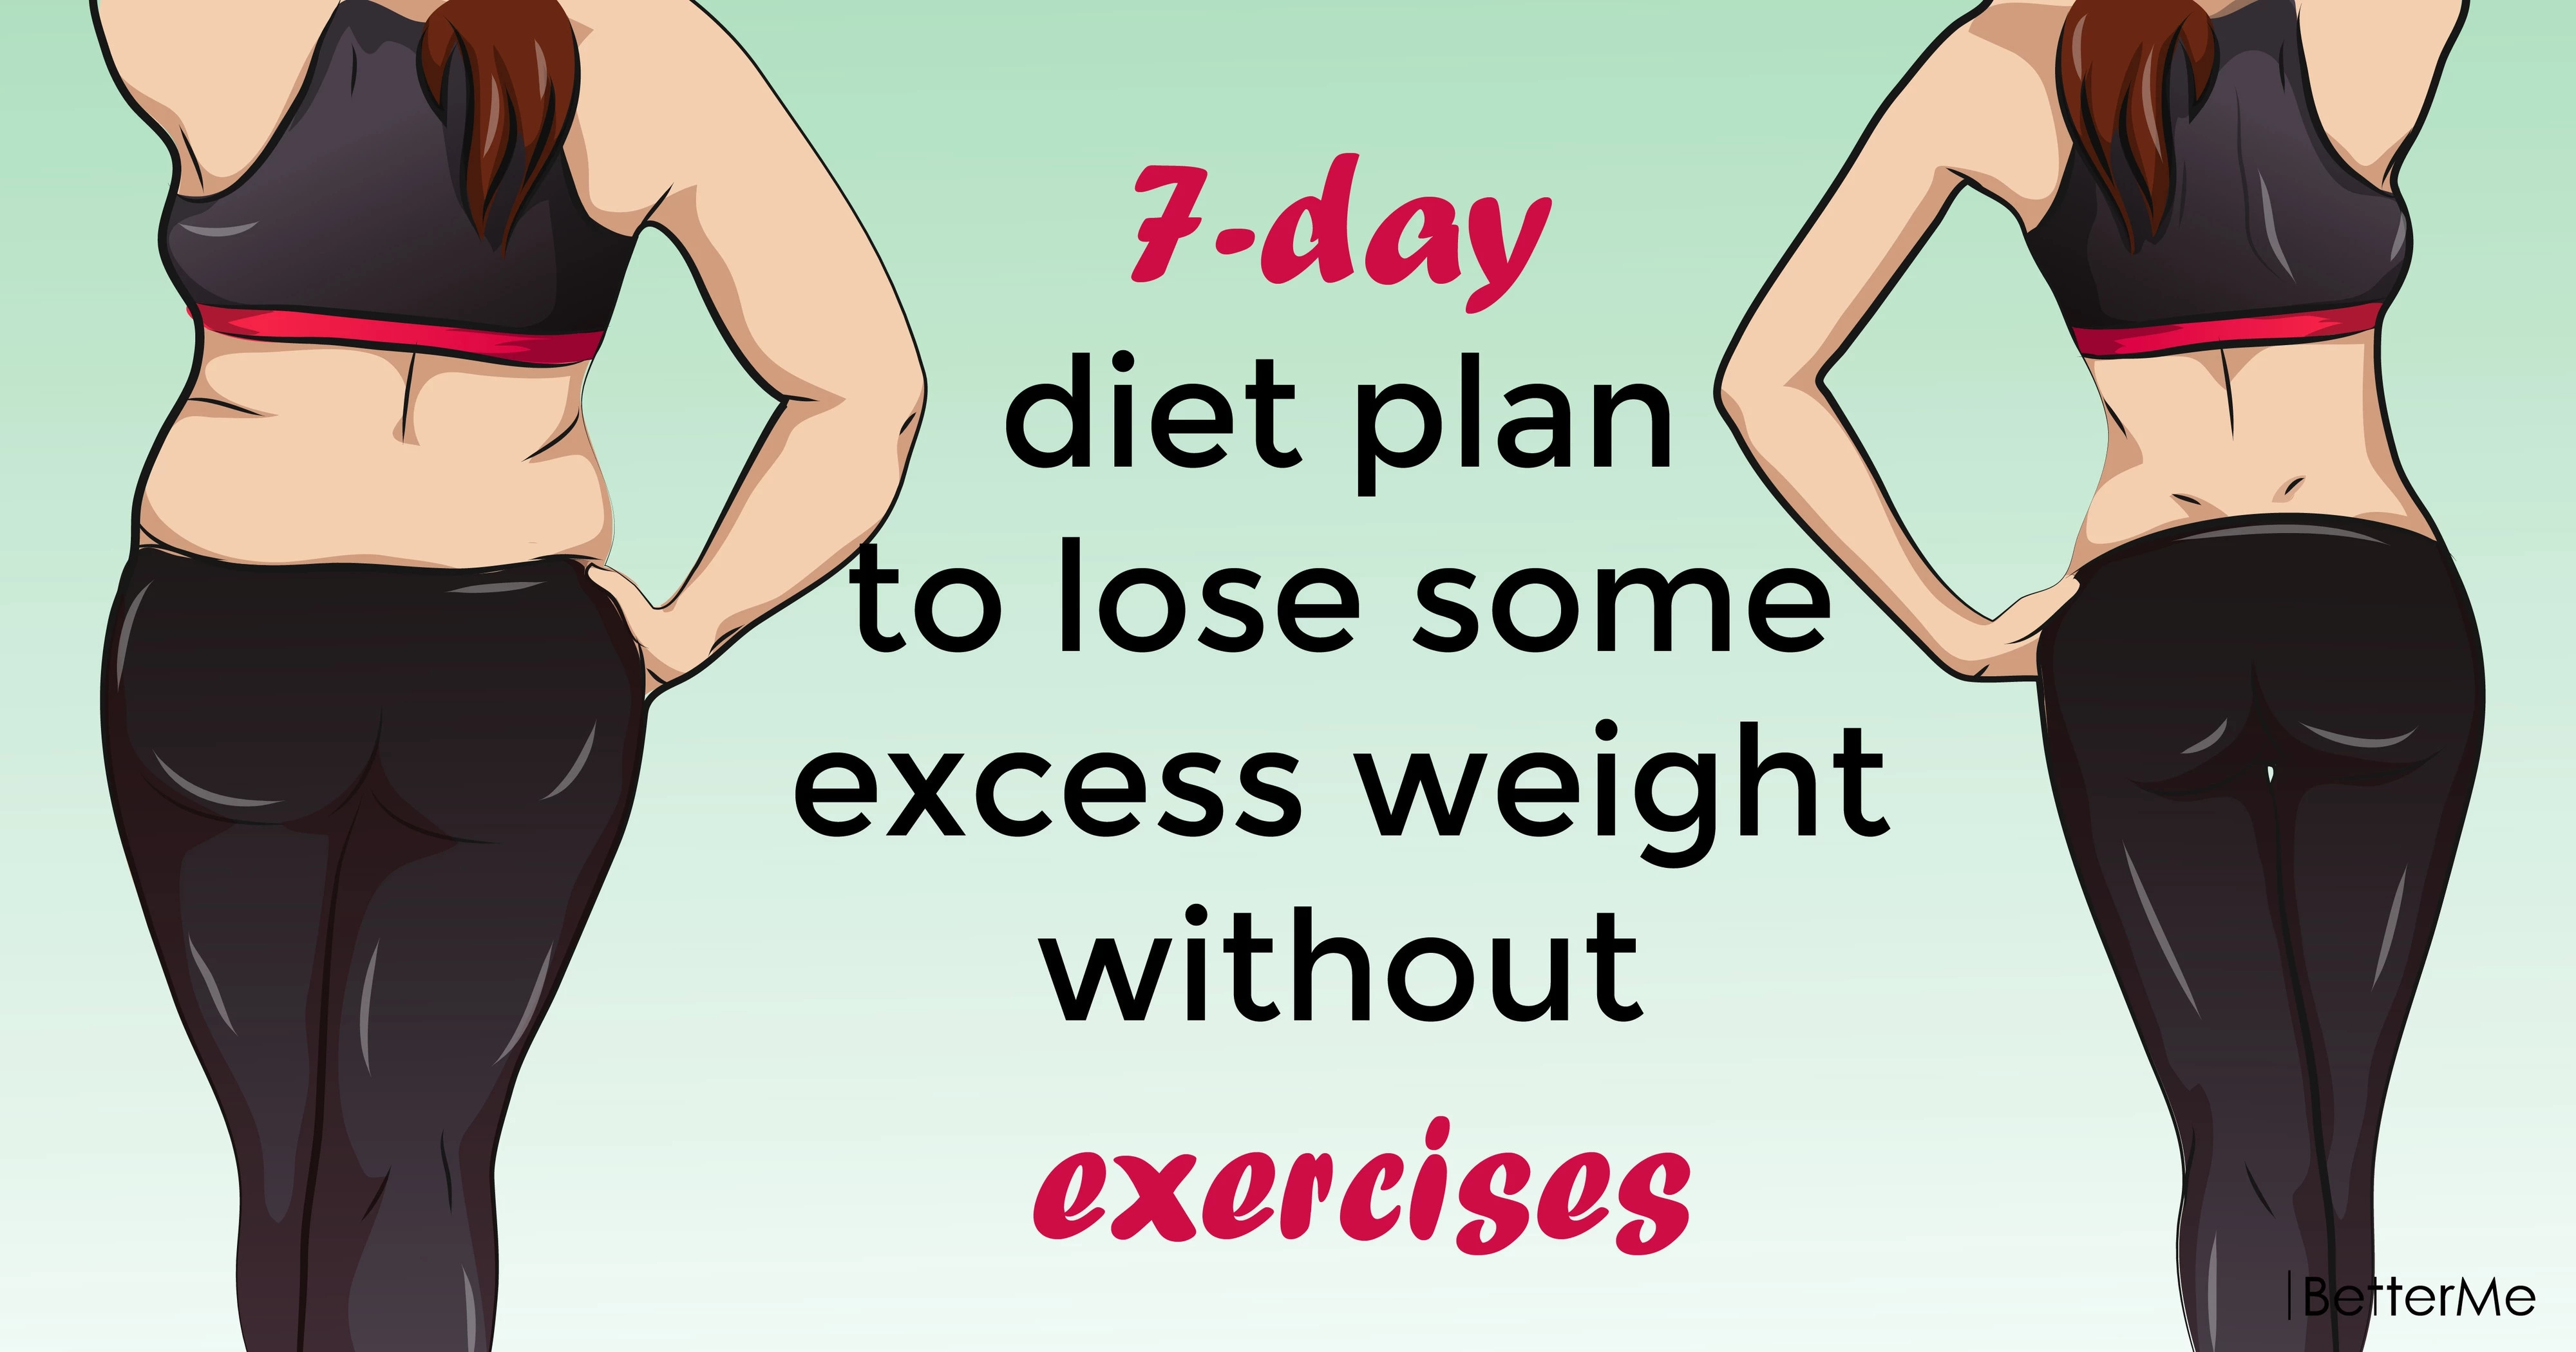 7-day diet plan to lose some excess weight without exercises